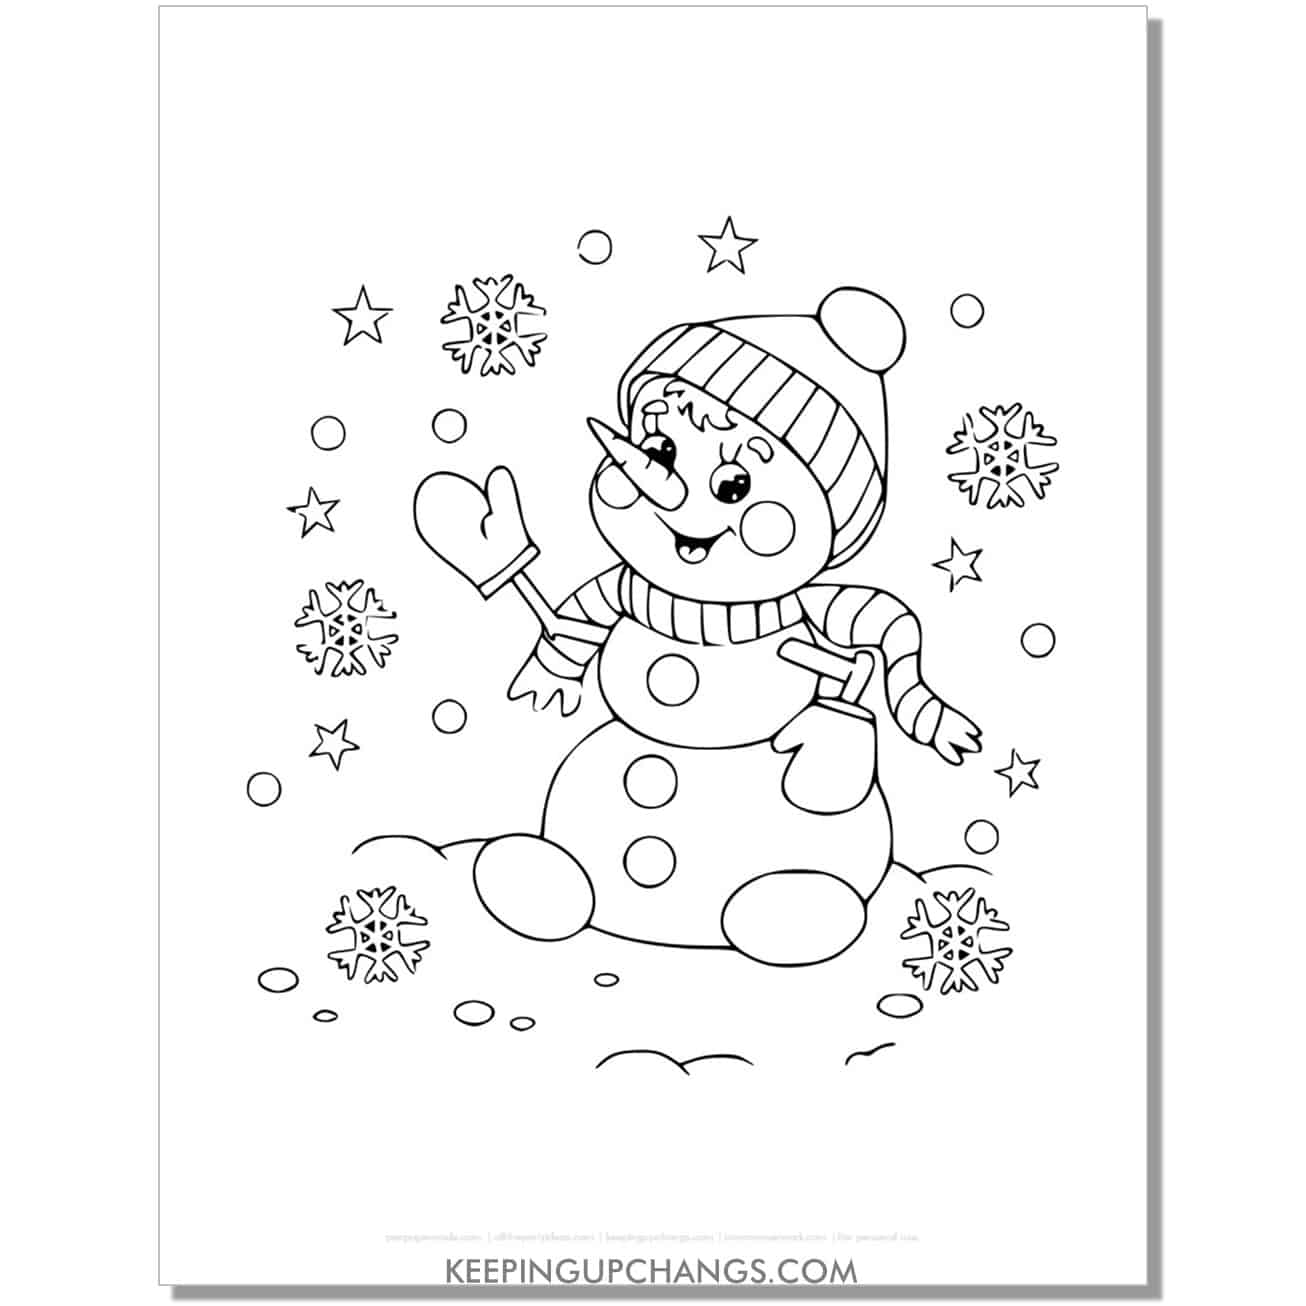 free vintage baby snowman with snowflakes coloring page.